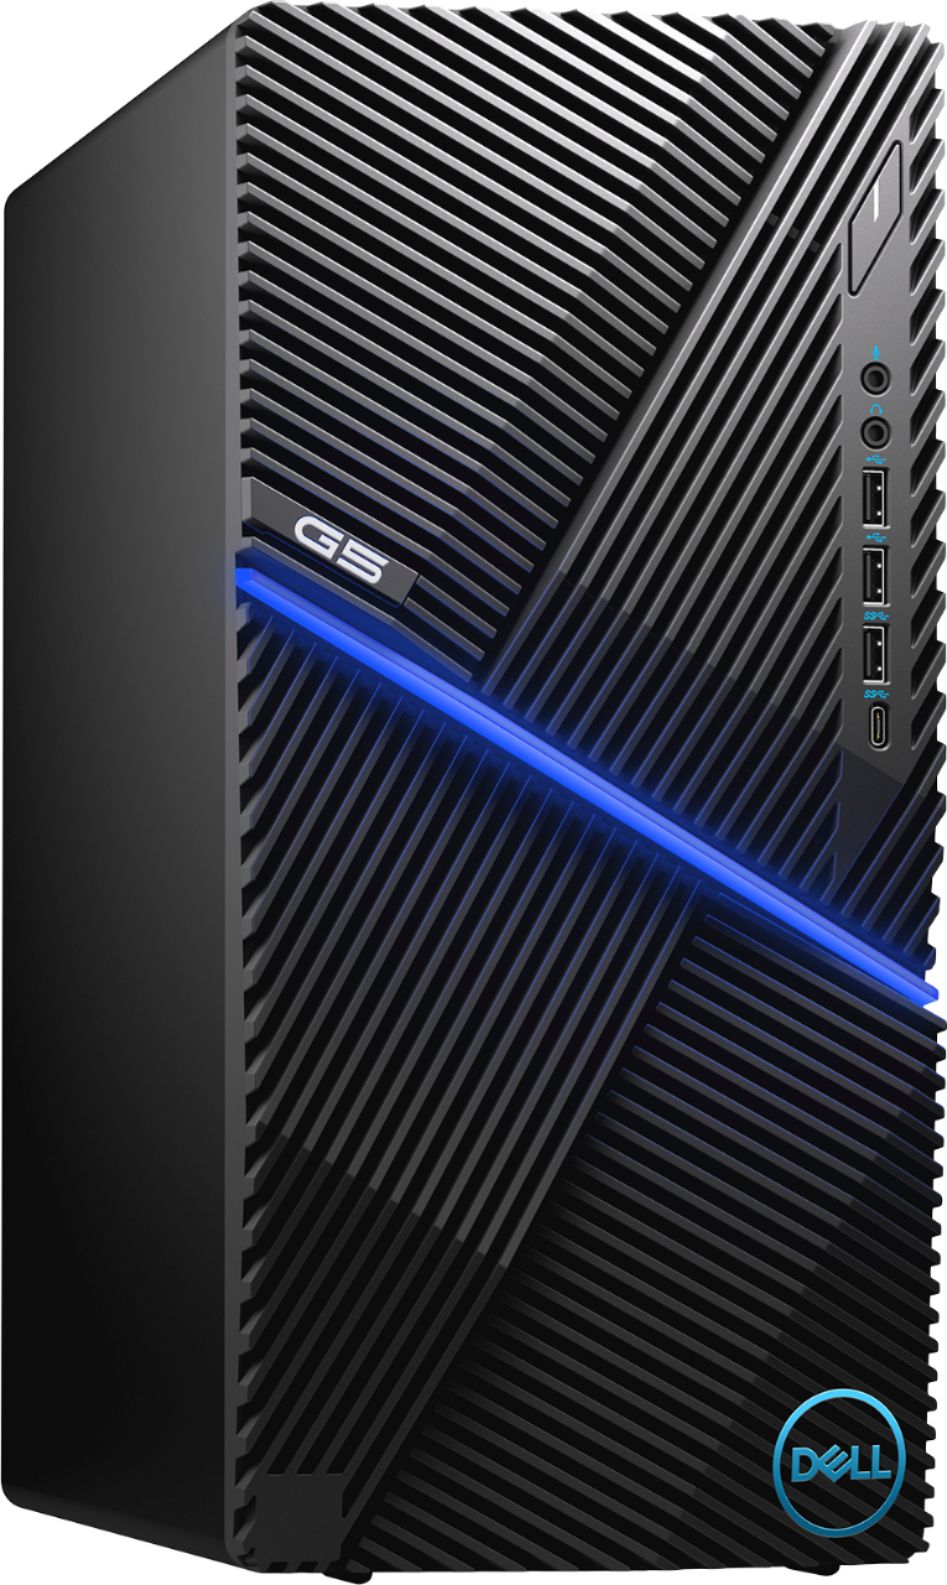 Dell G5 Gaming Desktop Intel Core I7 9700 16gb Memory Nvidia Geforce Gtx 1660 1tb Hdd 256gb Ssd Abyss Gray I5090 7619gry Pus Best Buy